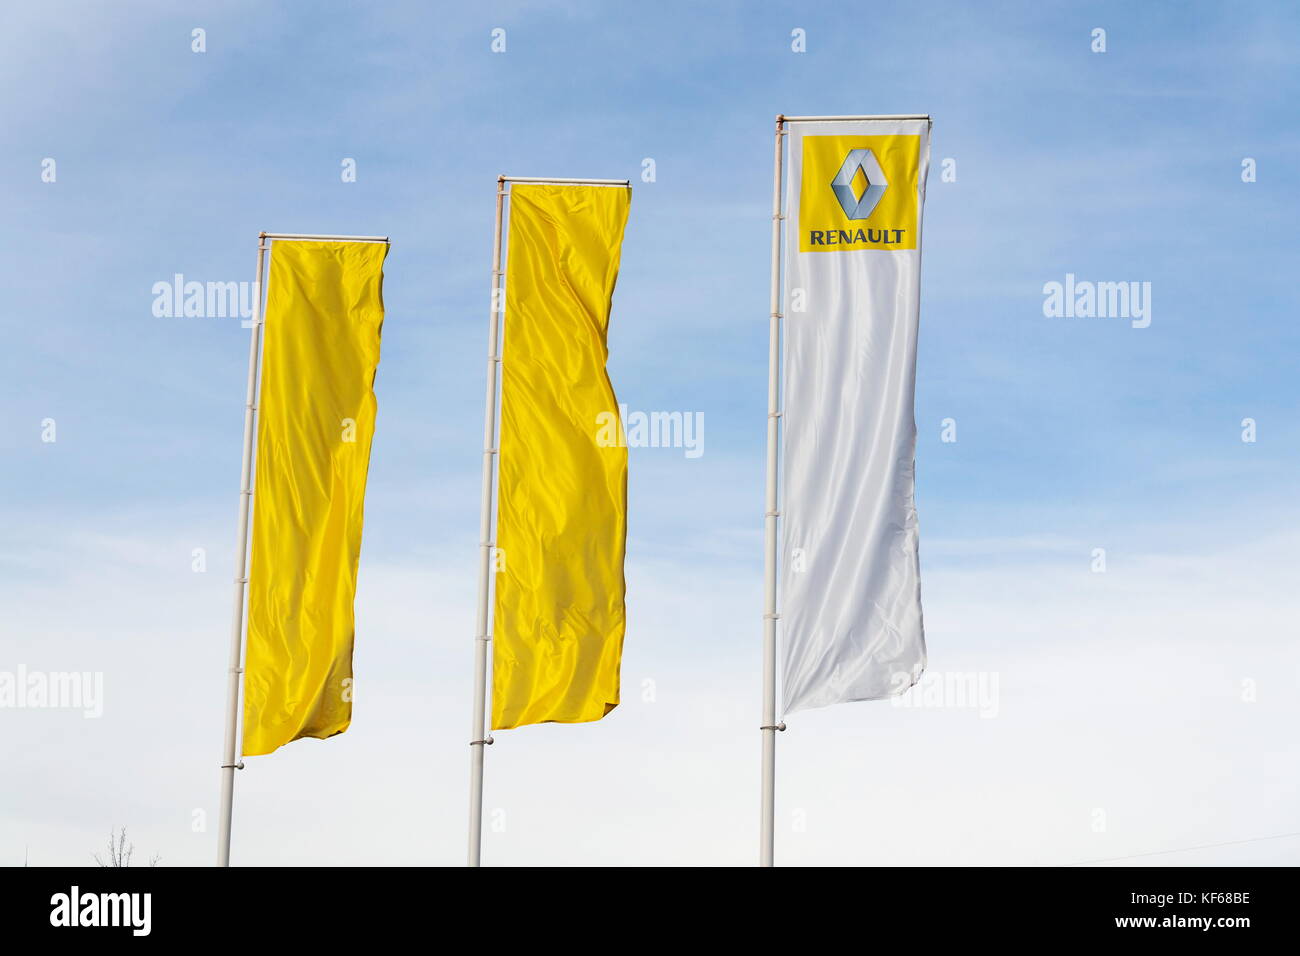 PRAGUE, CZECH REPUBLIC - OCTOBER 25: Renault company logo on dealership building on October 25, 2017 in Prague. Renault beat expectations when sales j Stock Photo